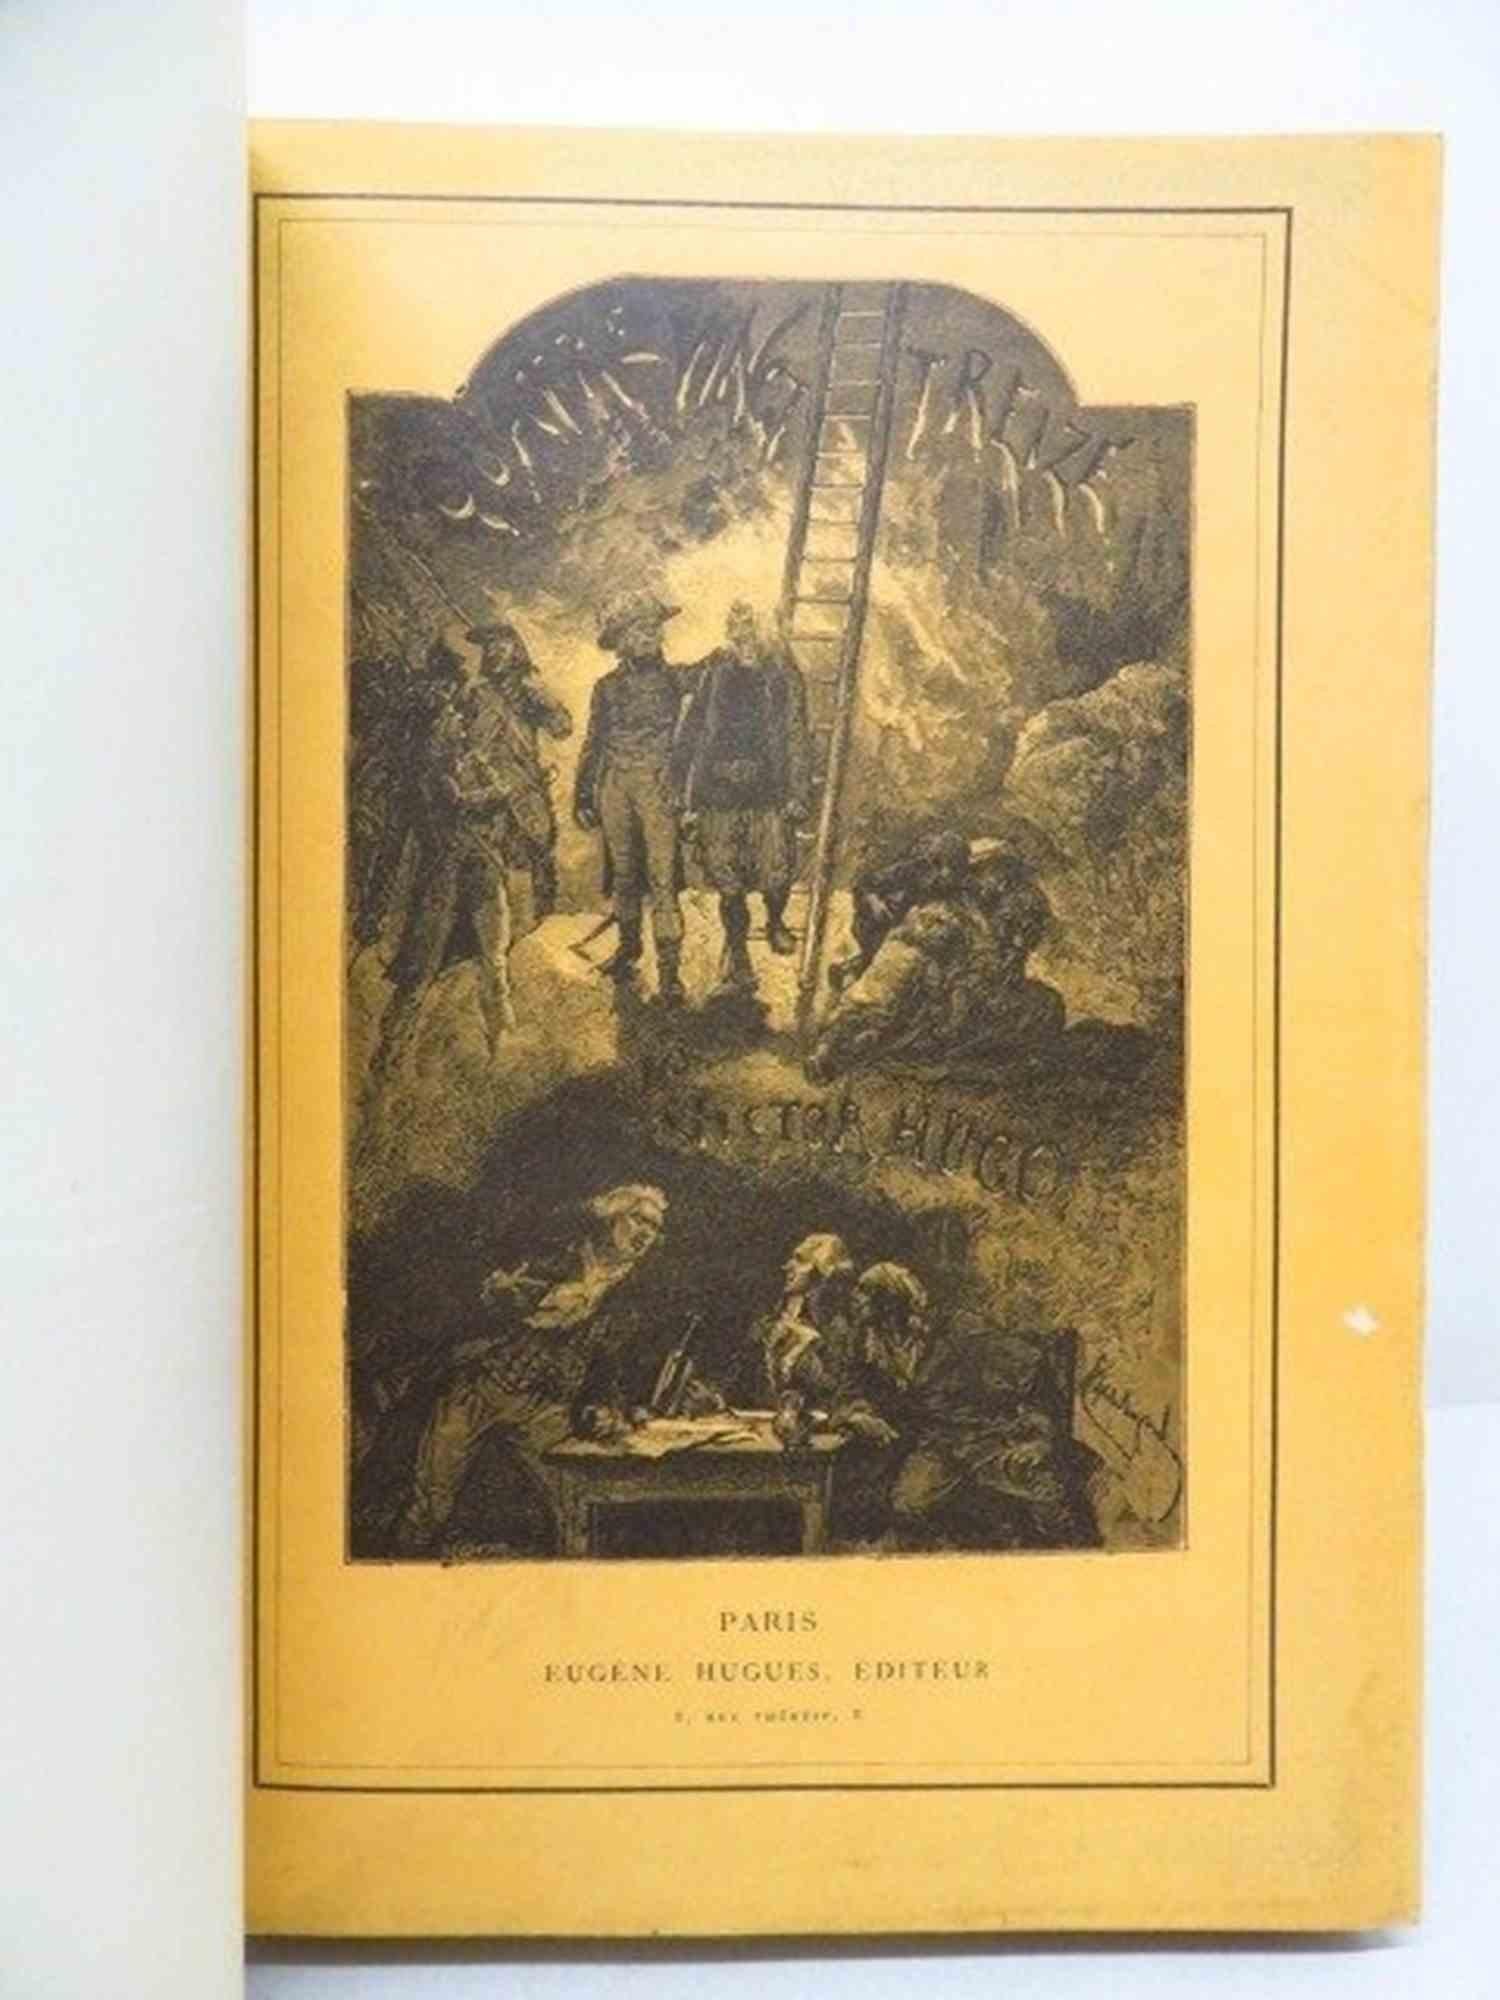 Quatrevingt - Treize is a rare book by Victor Hugo Vierge Daniel, Brion Gustave and otherspublished in 1876

Edited by Eugène Hugues – Paris

Original “De luxe” illustrated edition .

“Tirage de tête” of 65 numbered copies on velin teinté (this is